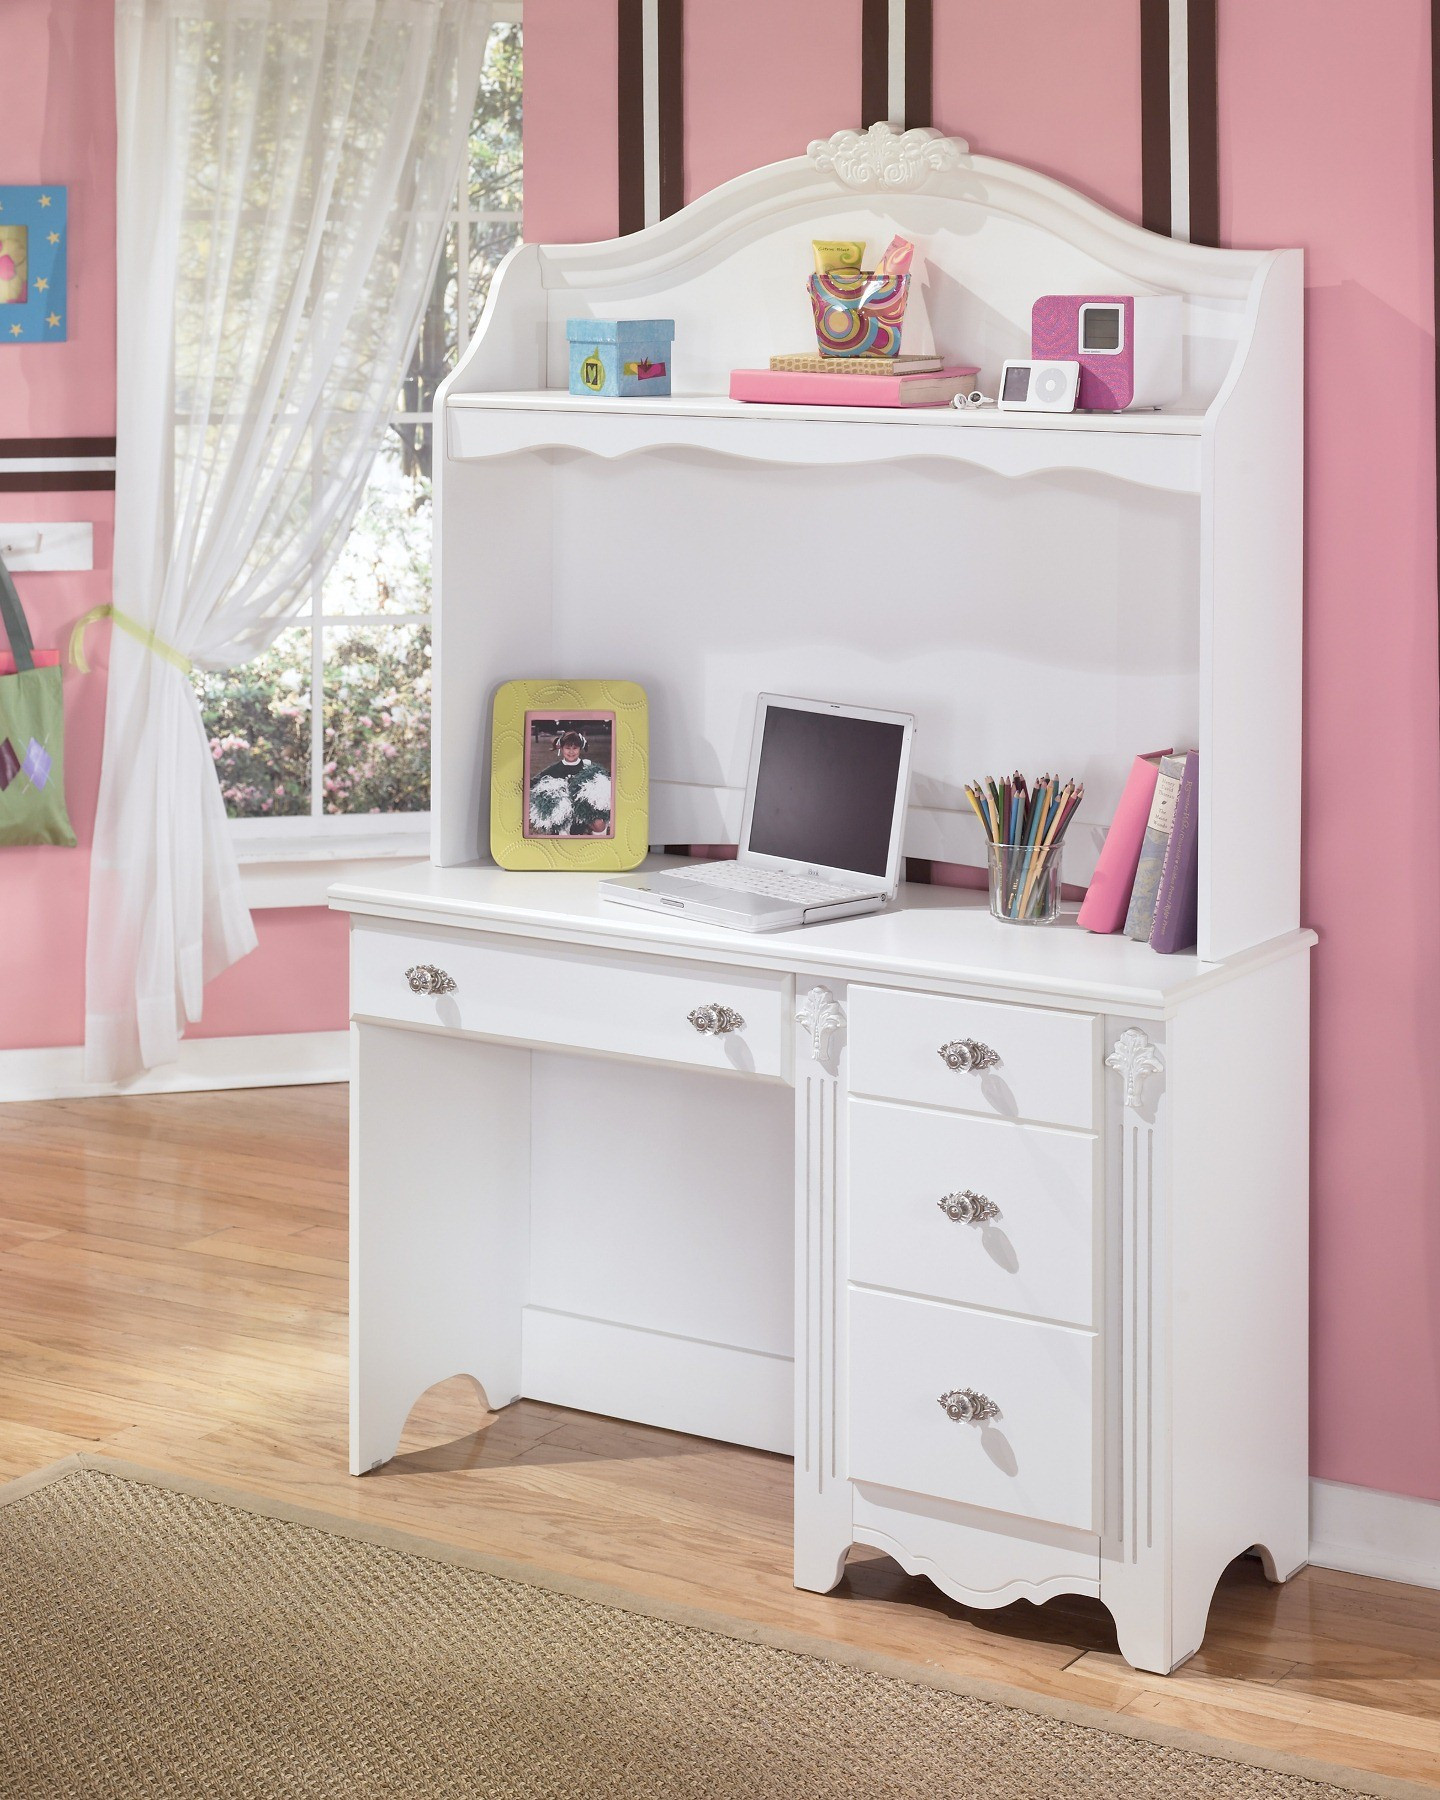 Girls Bedroom Set With Desk
 Exquisite Bedroom Desk With Hutch from Ashley B188 22 23